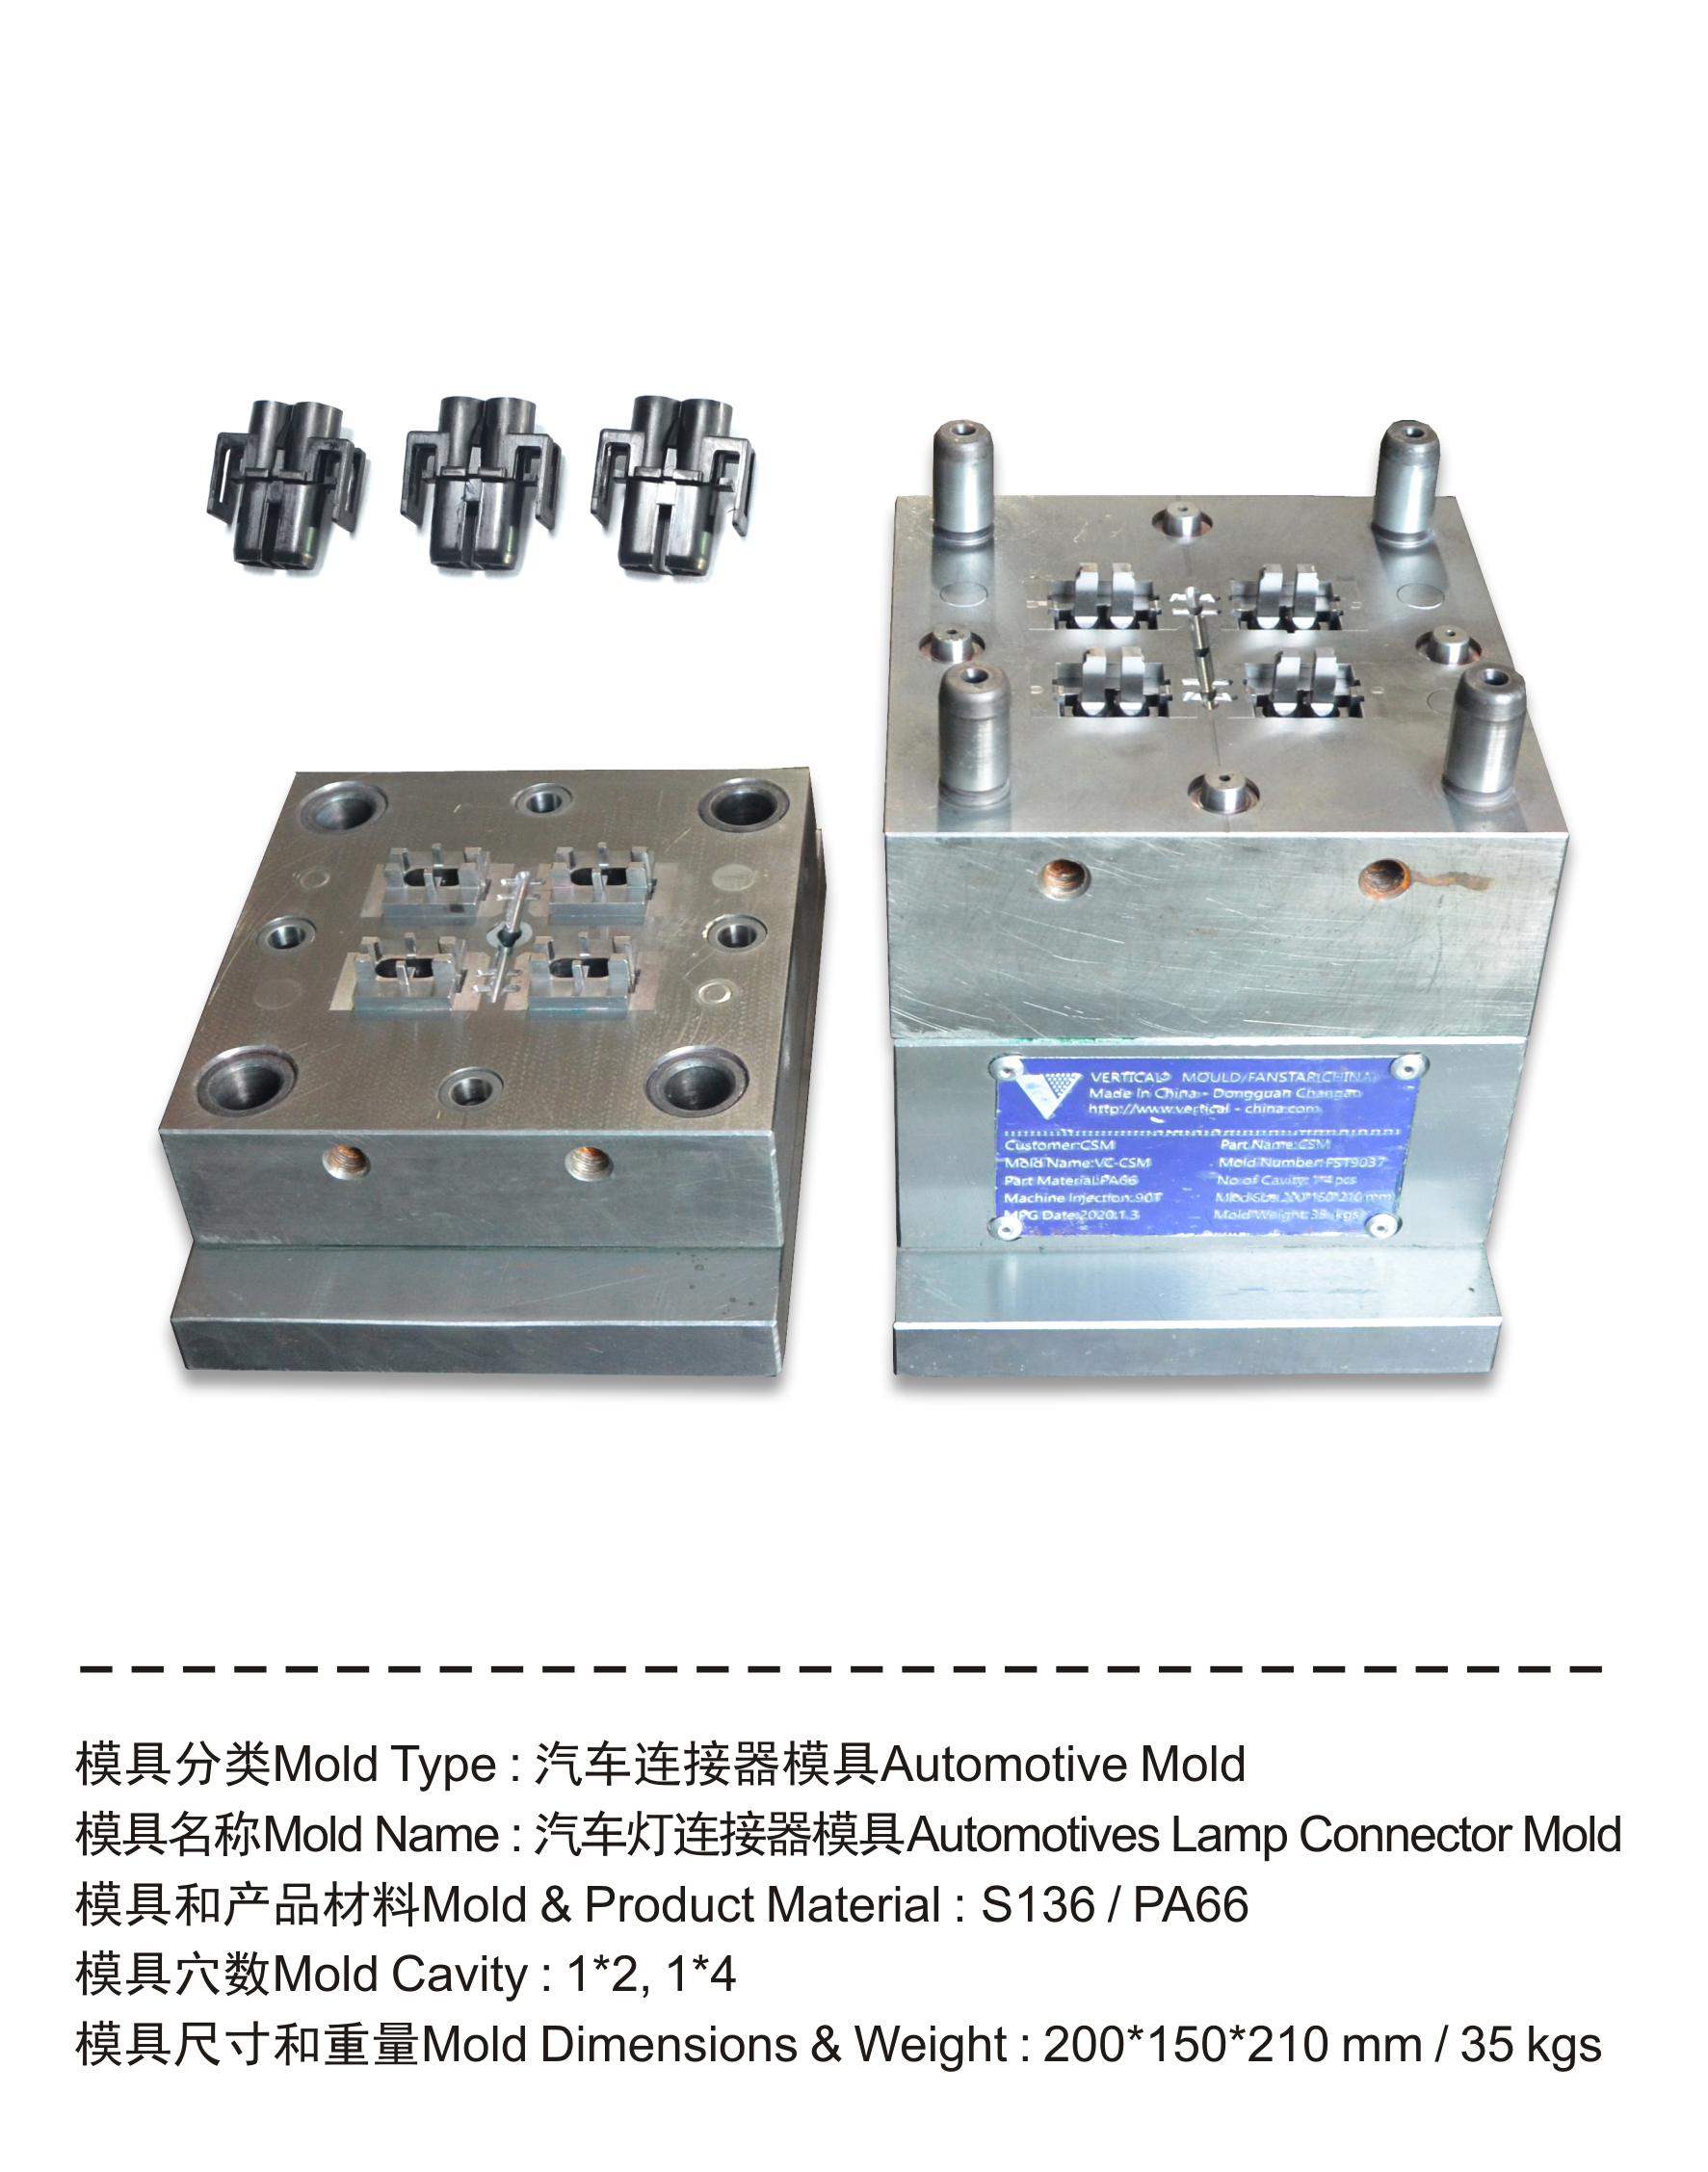 Automotives Lamp Connector Mold